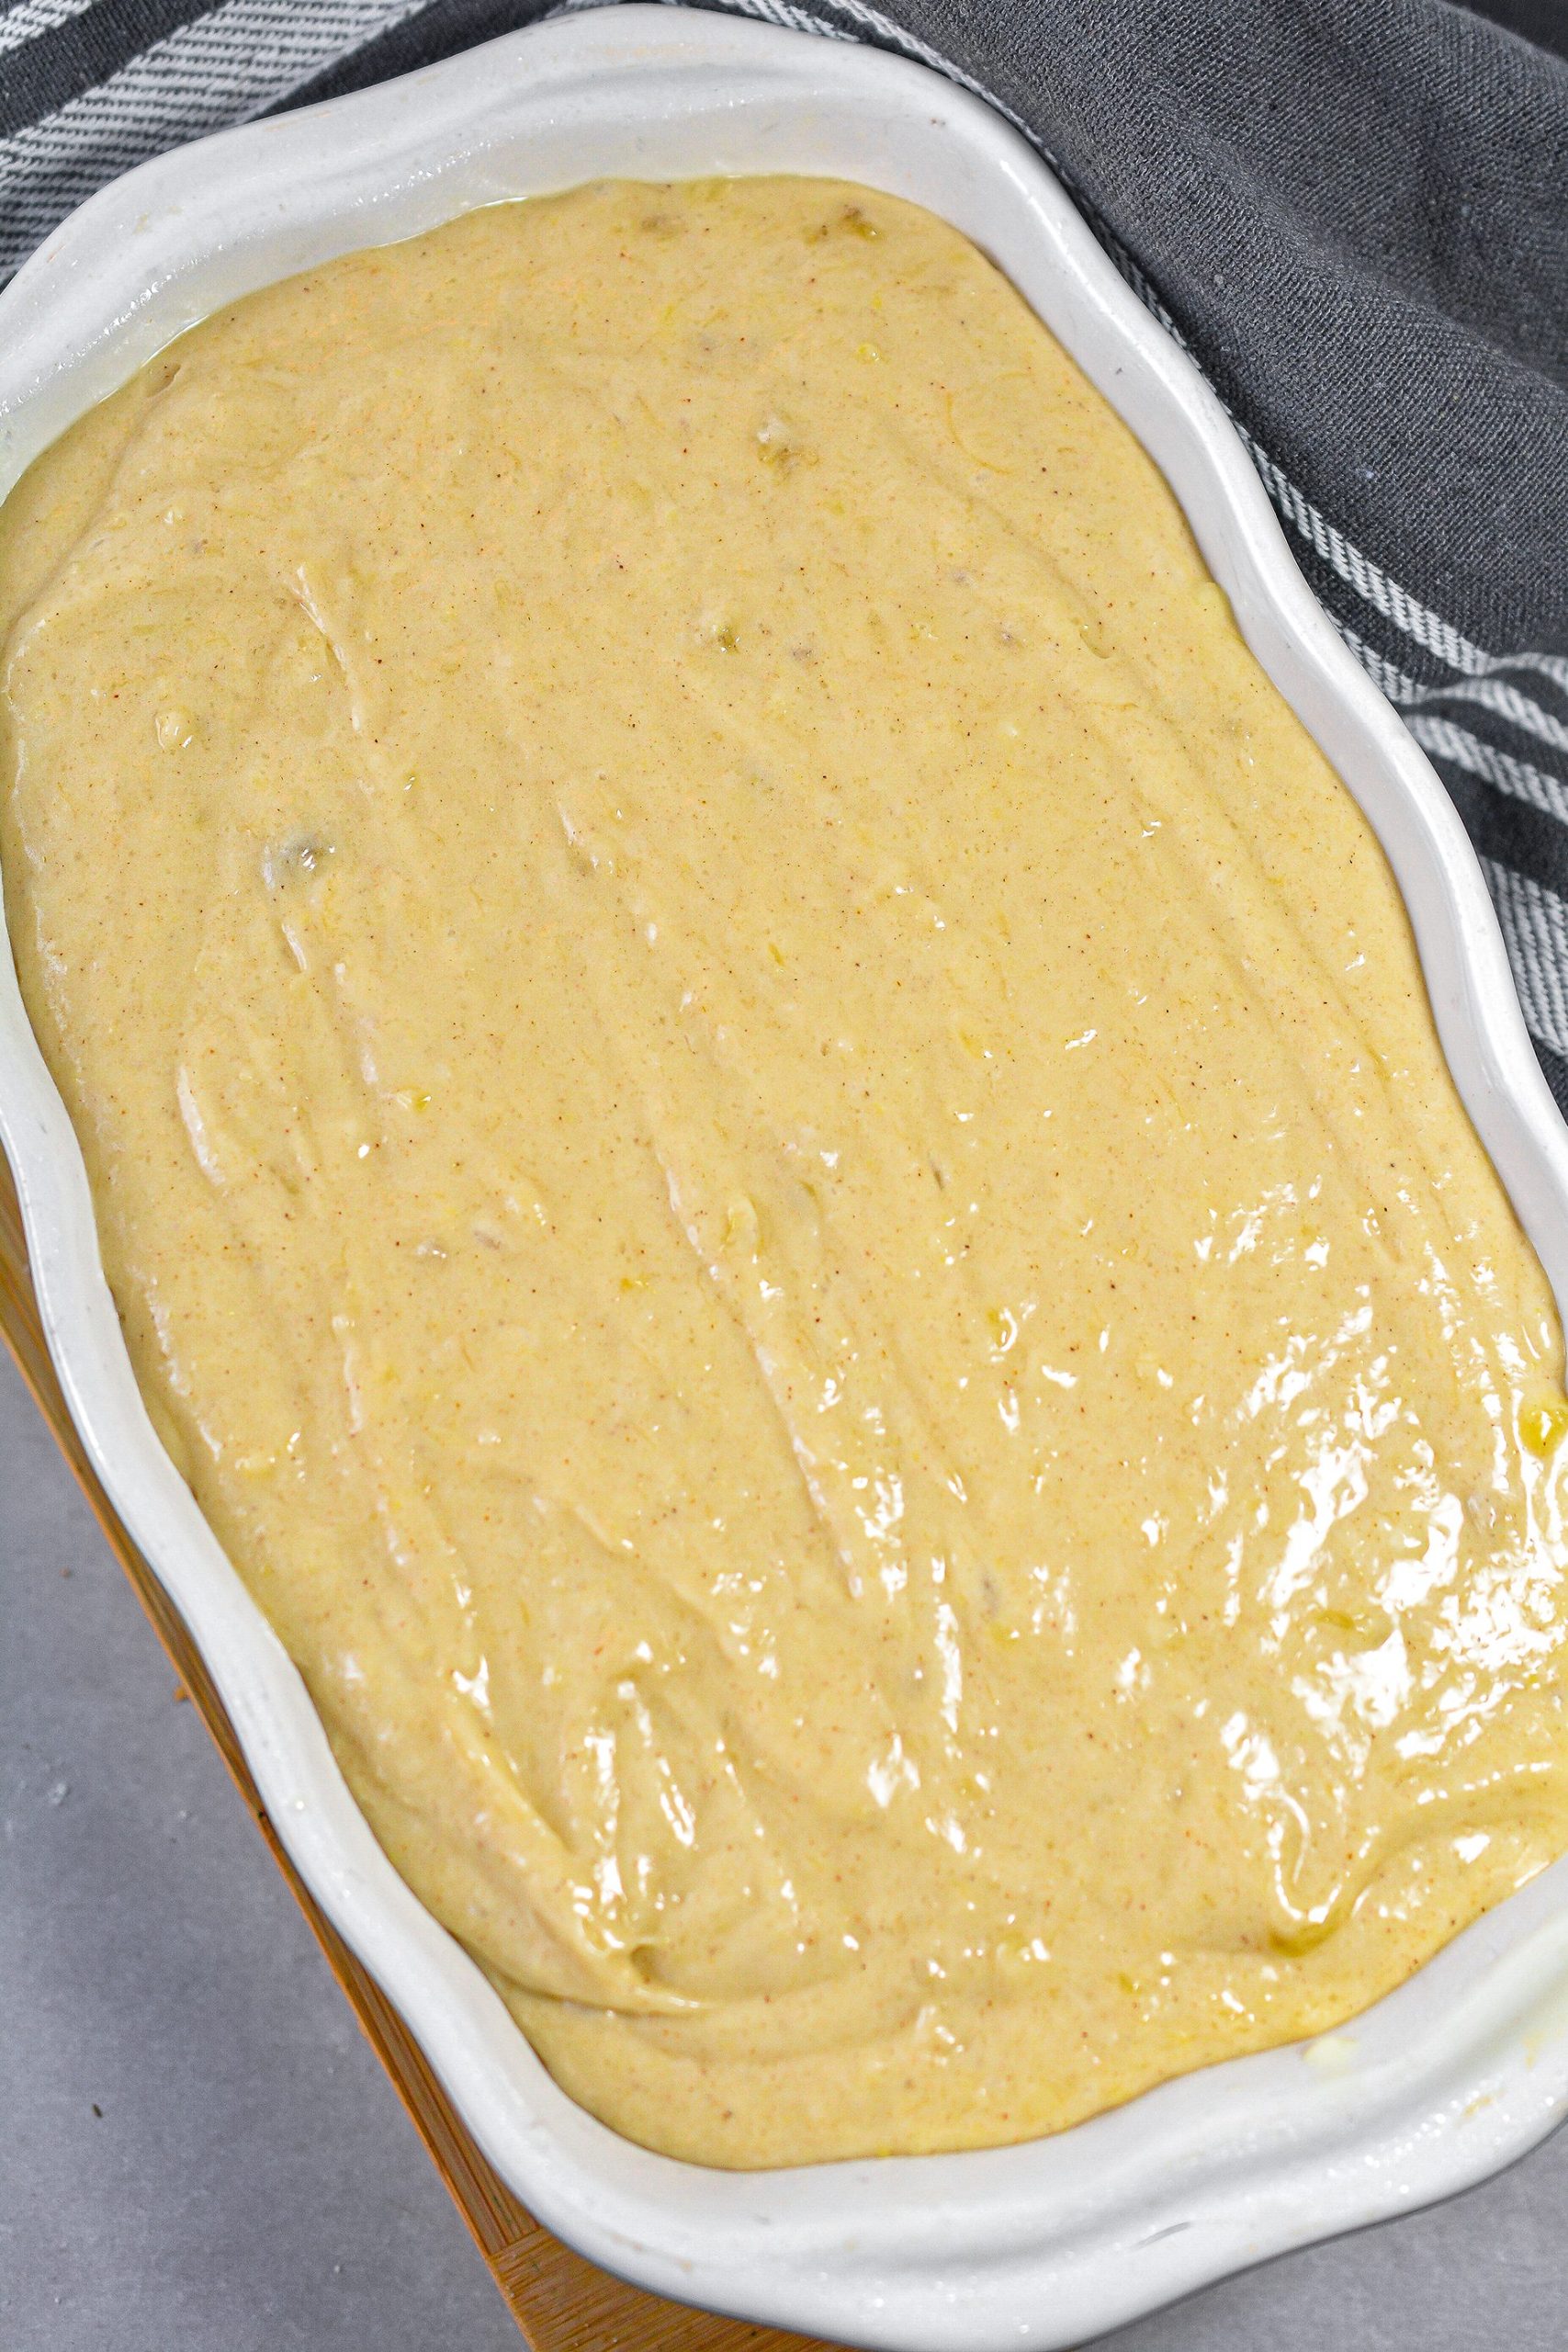 Pour the batter into a loaf pan that is well greased.